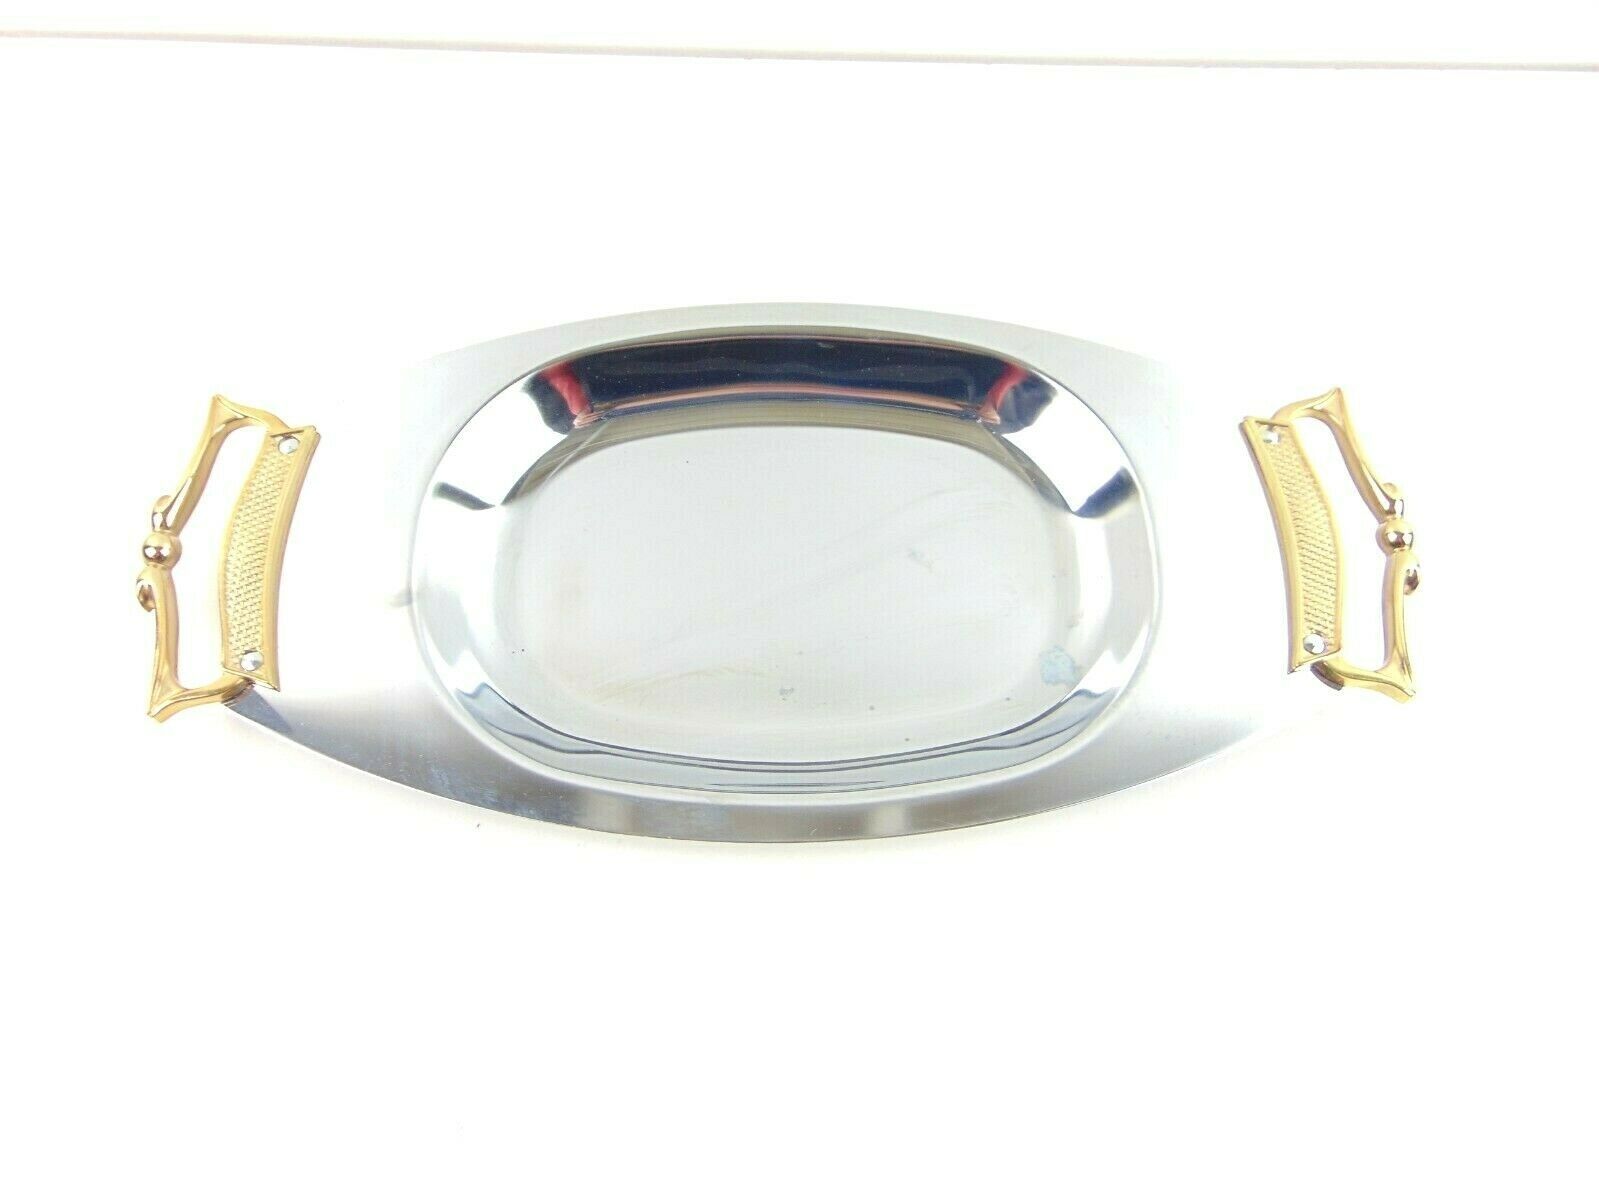 Kromex Serving Plate With Brass Handles 14" x 6 3/4" - $24.74